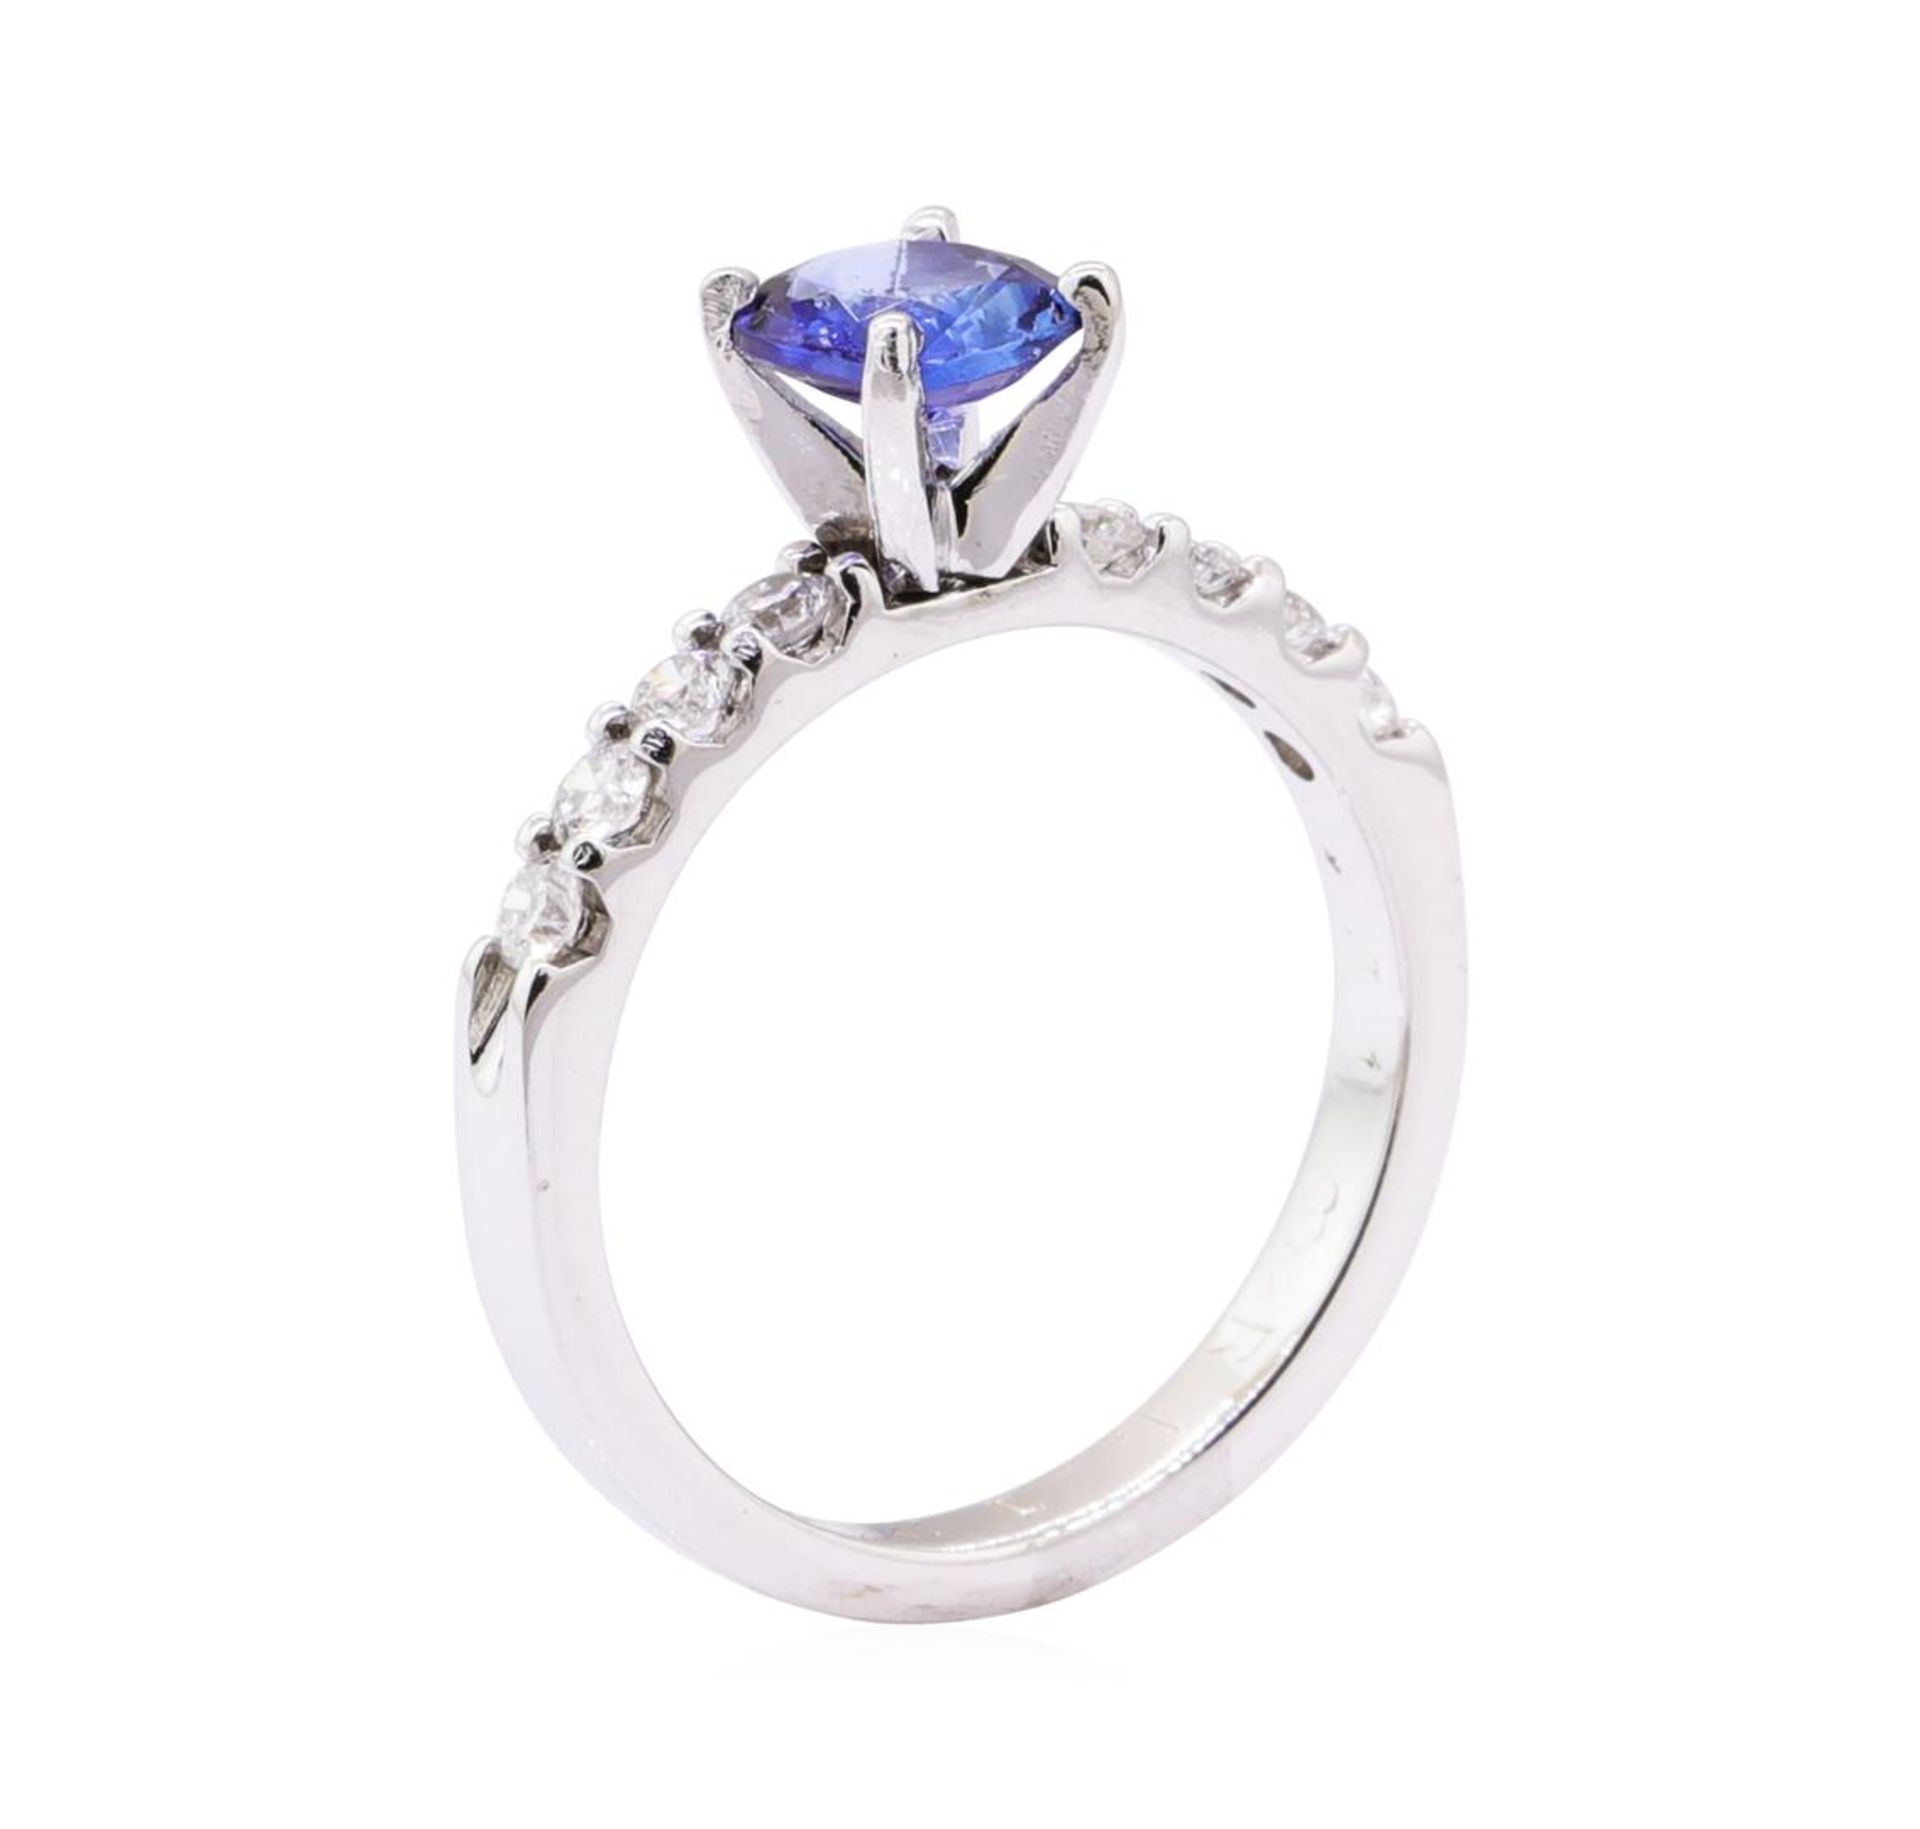 1.11ctw Blue Sapphire and Diamond Ring - 14KT White Gold - Image 4 of 4